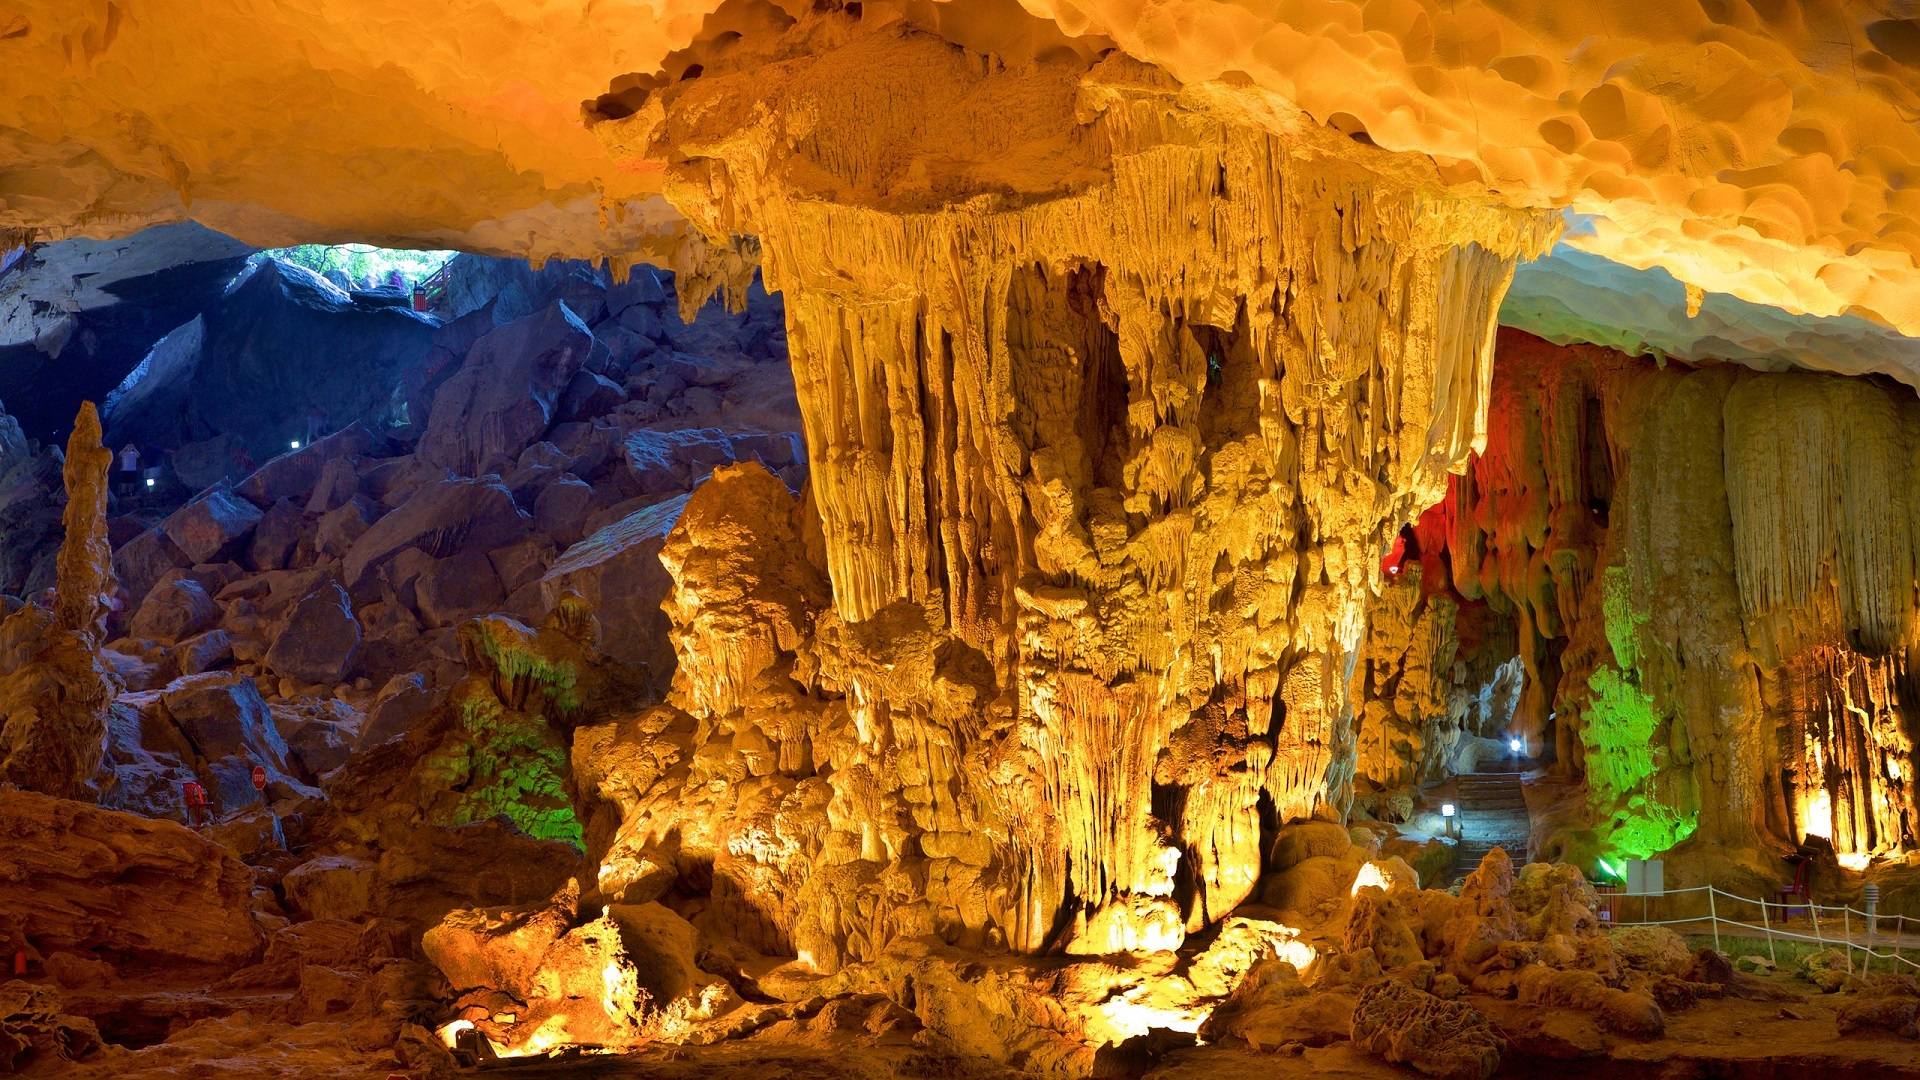 Explore the beauty and mystery of Hang Sung Sot Cave in Halong Bay Vietnam